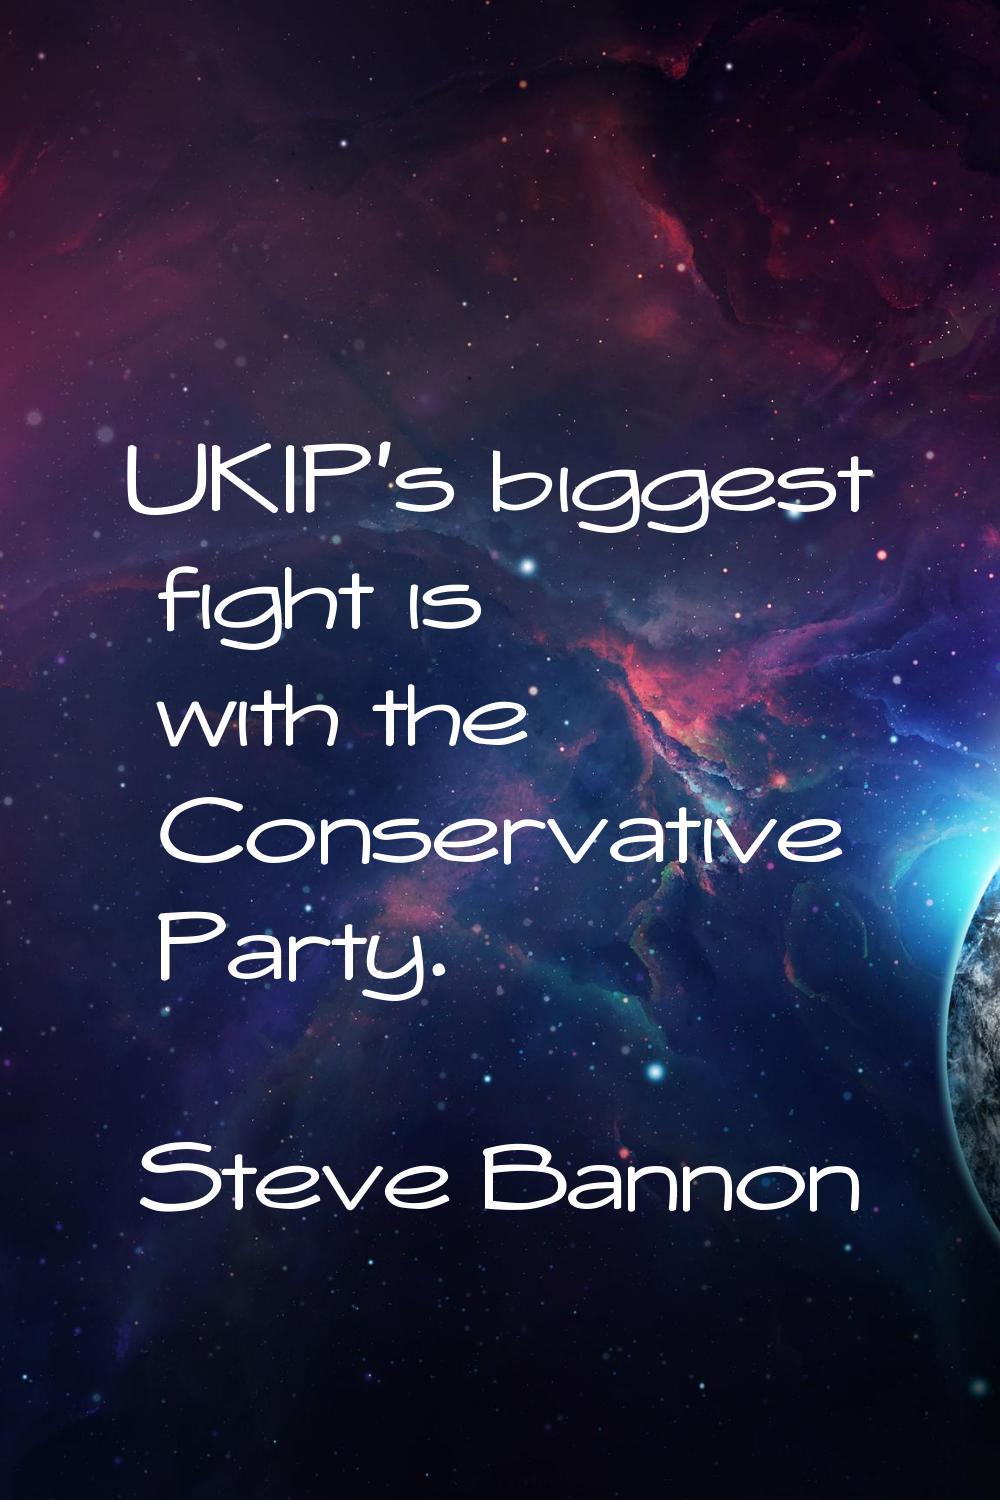 UKIP's biggest fight is with the Conservative Party.